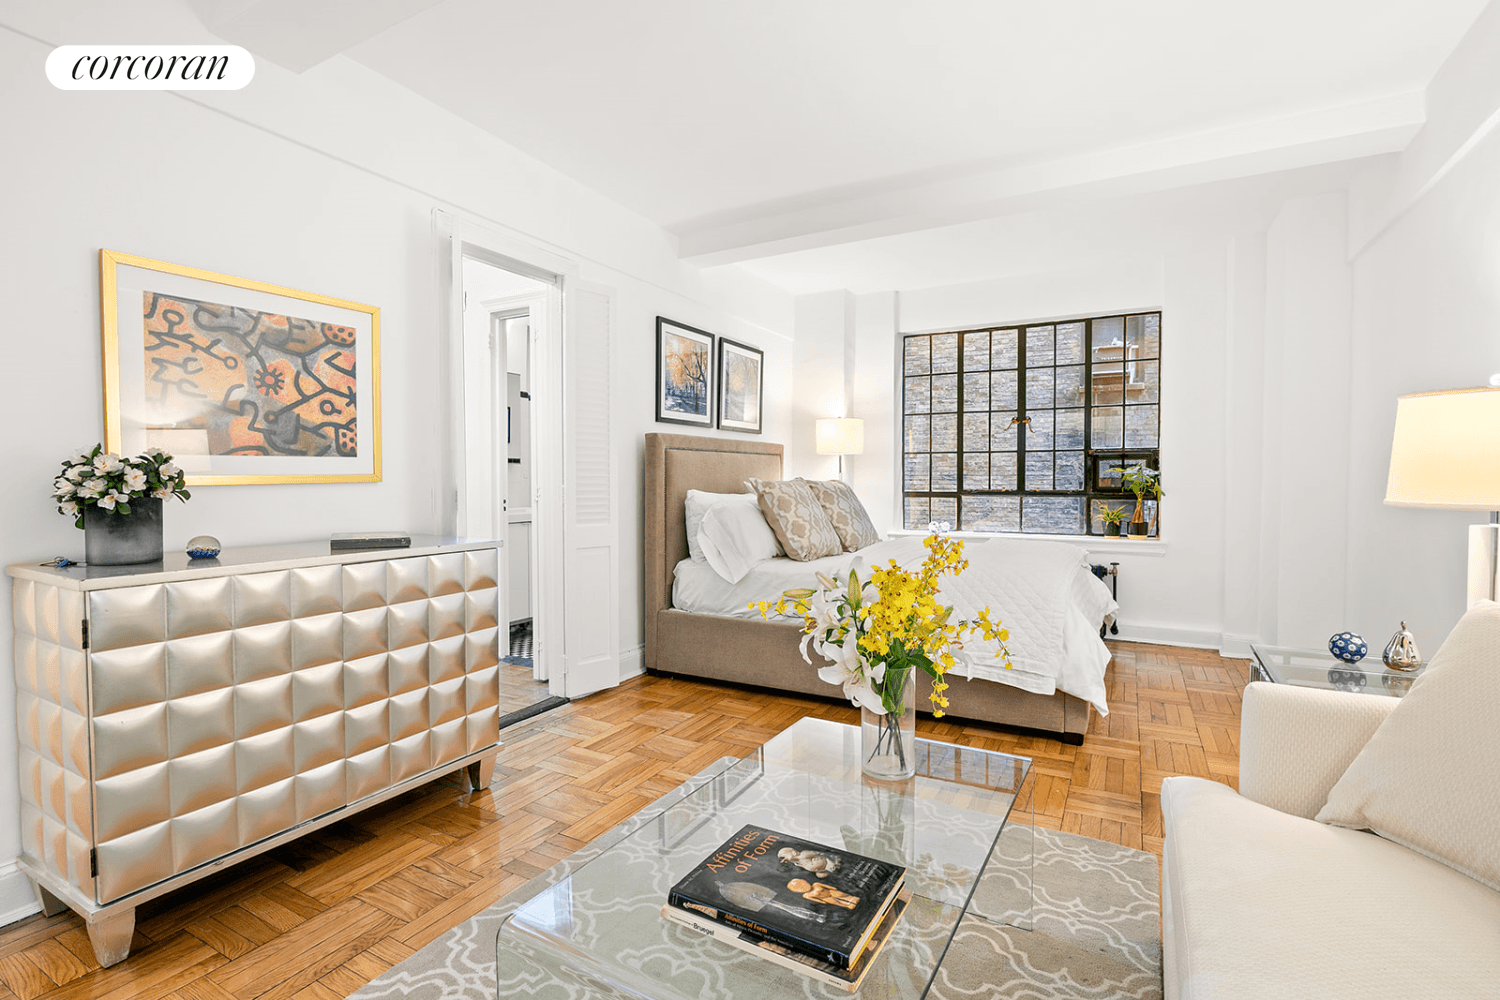 NEW TO MARKET STUDIO SEPARATE ENTRY FOYER SEPARATE DRESSING AREA HIGH BEAMED CEILINGS CASEMENT WINDOWS PARQUET FLOORS140 East 40th Street 6J is a bright and airy Pre War Art Deco ...